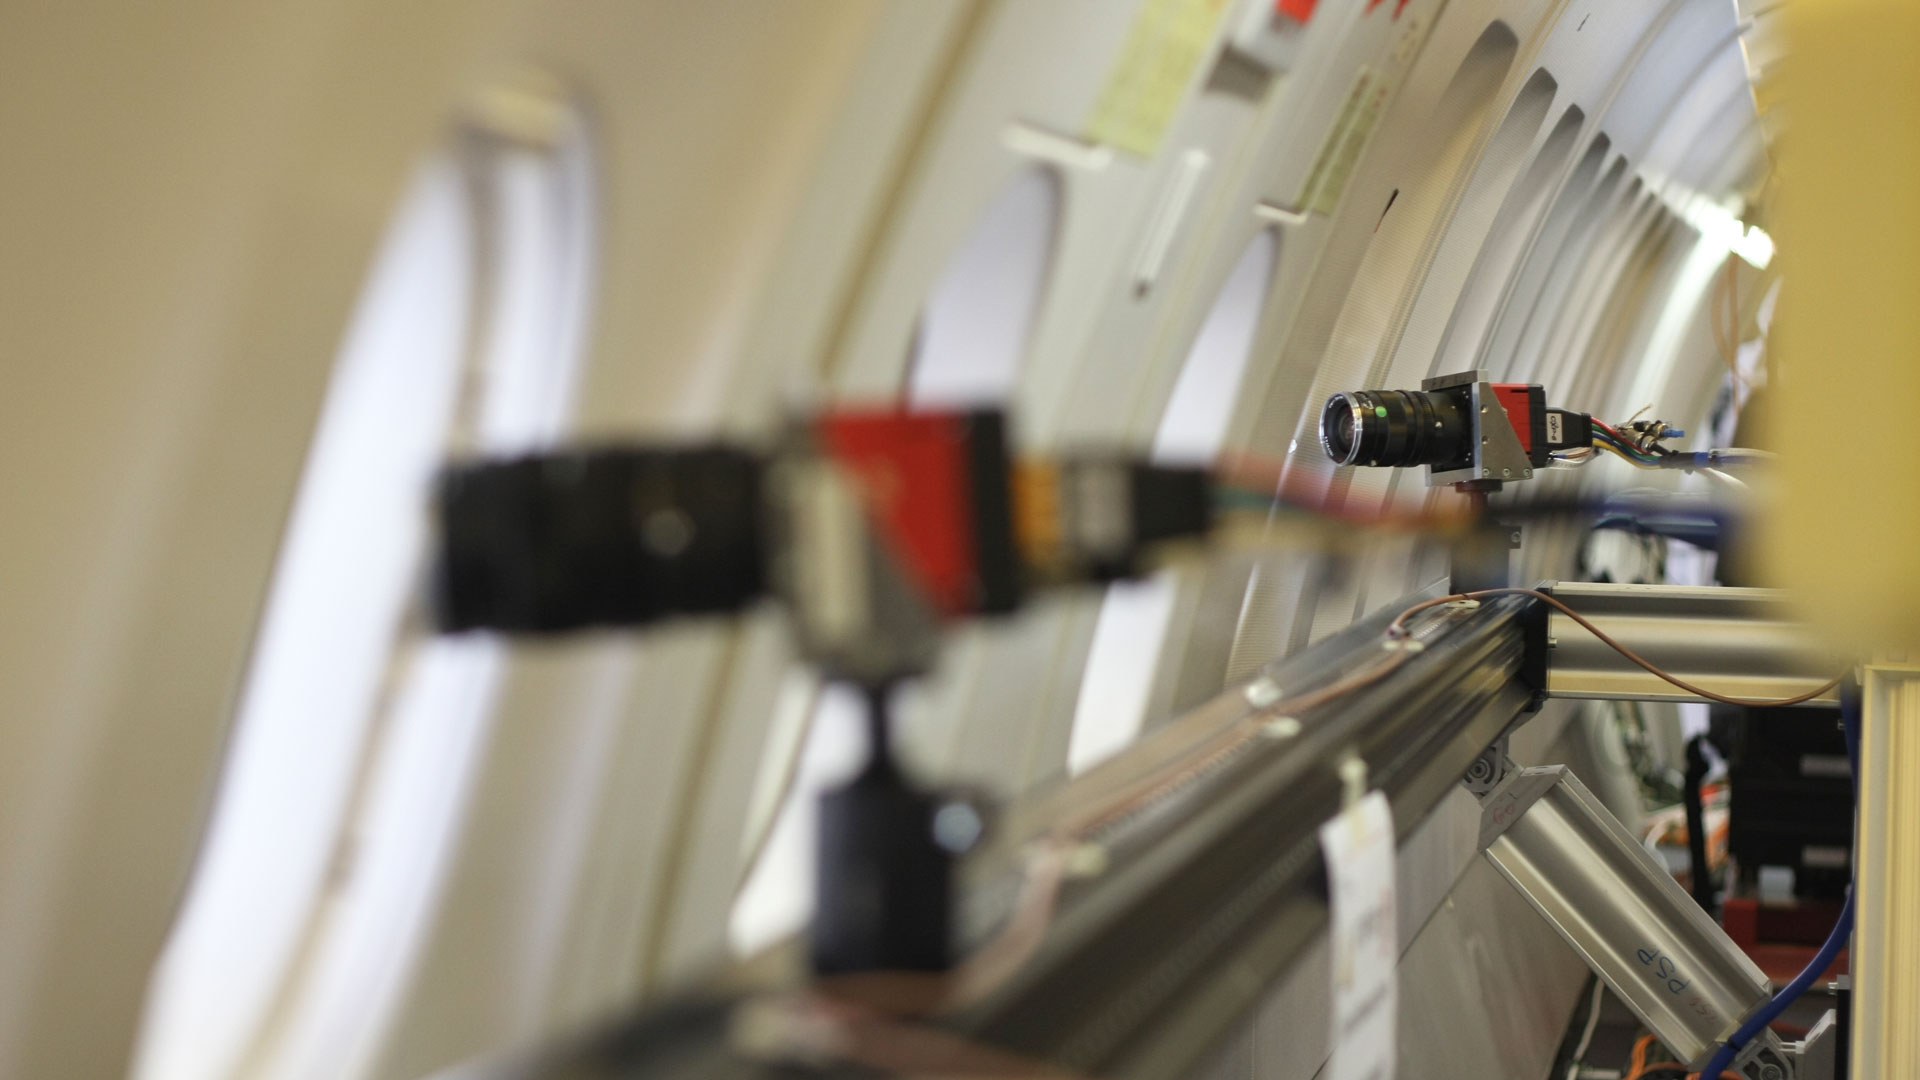 Measurement instruments in the aircraft